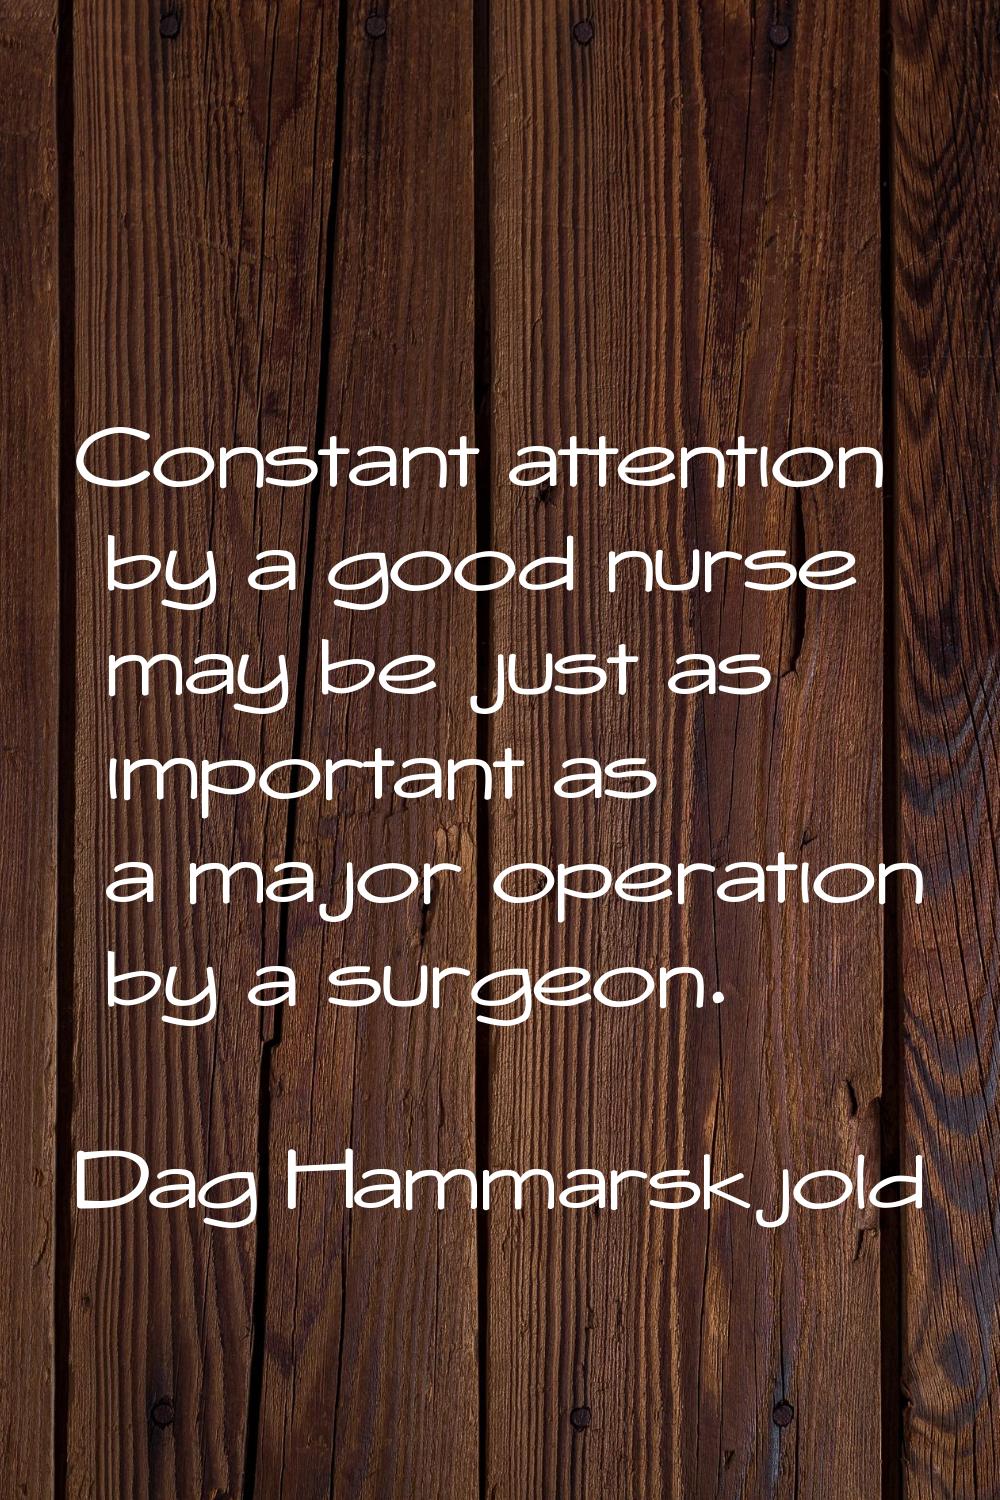 Constant attention by a good nurse may be just as important as a major operation by a surgeon.